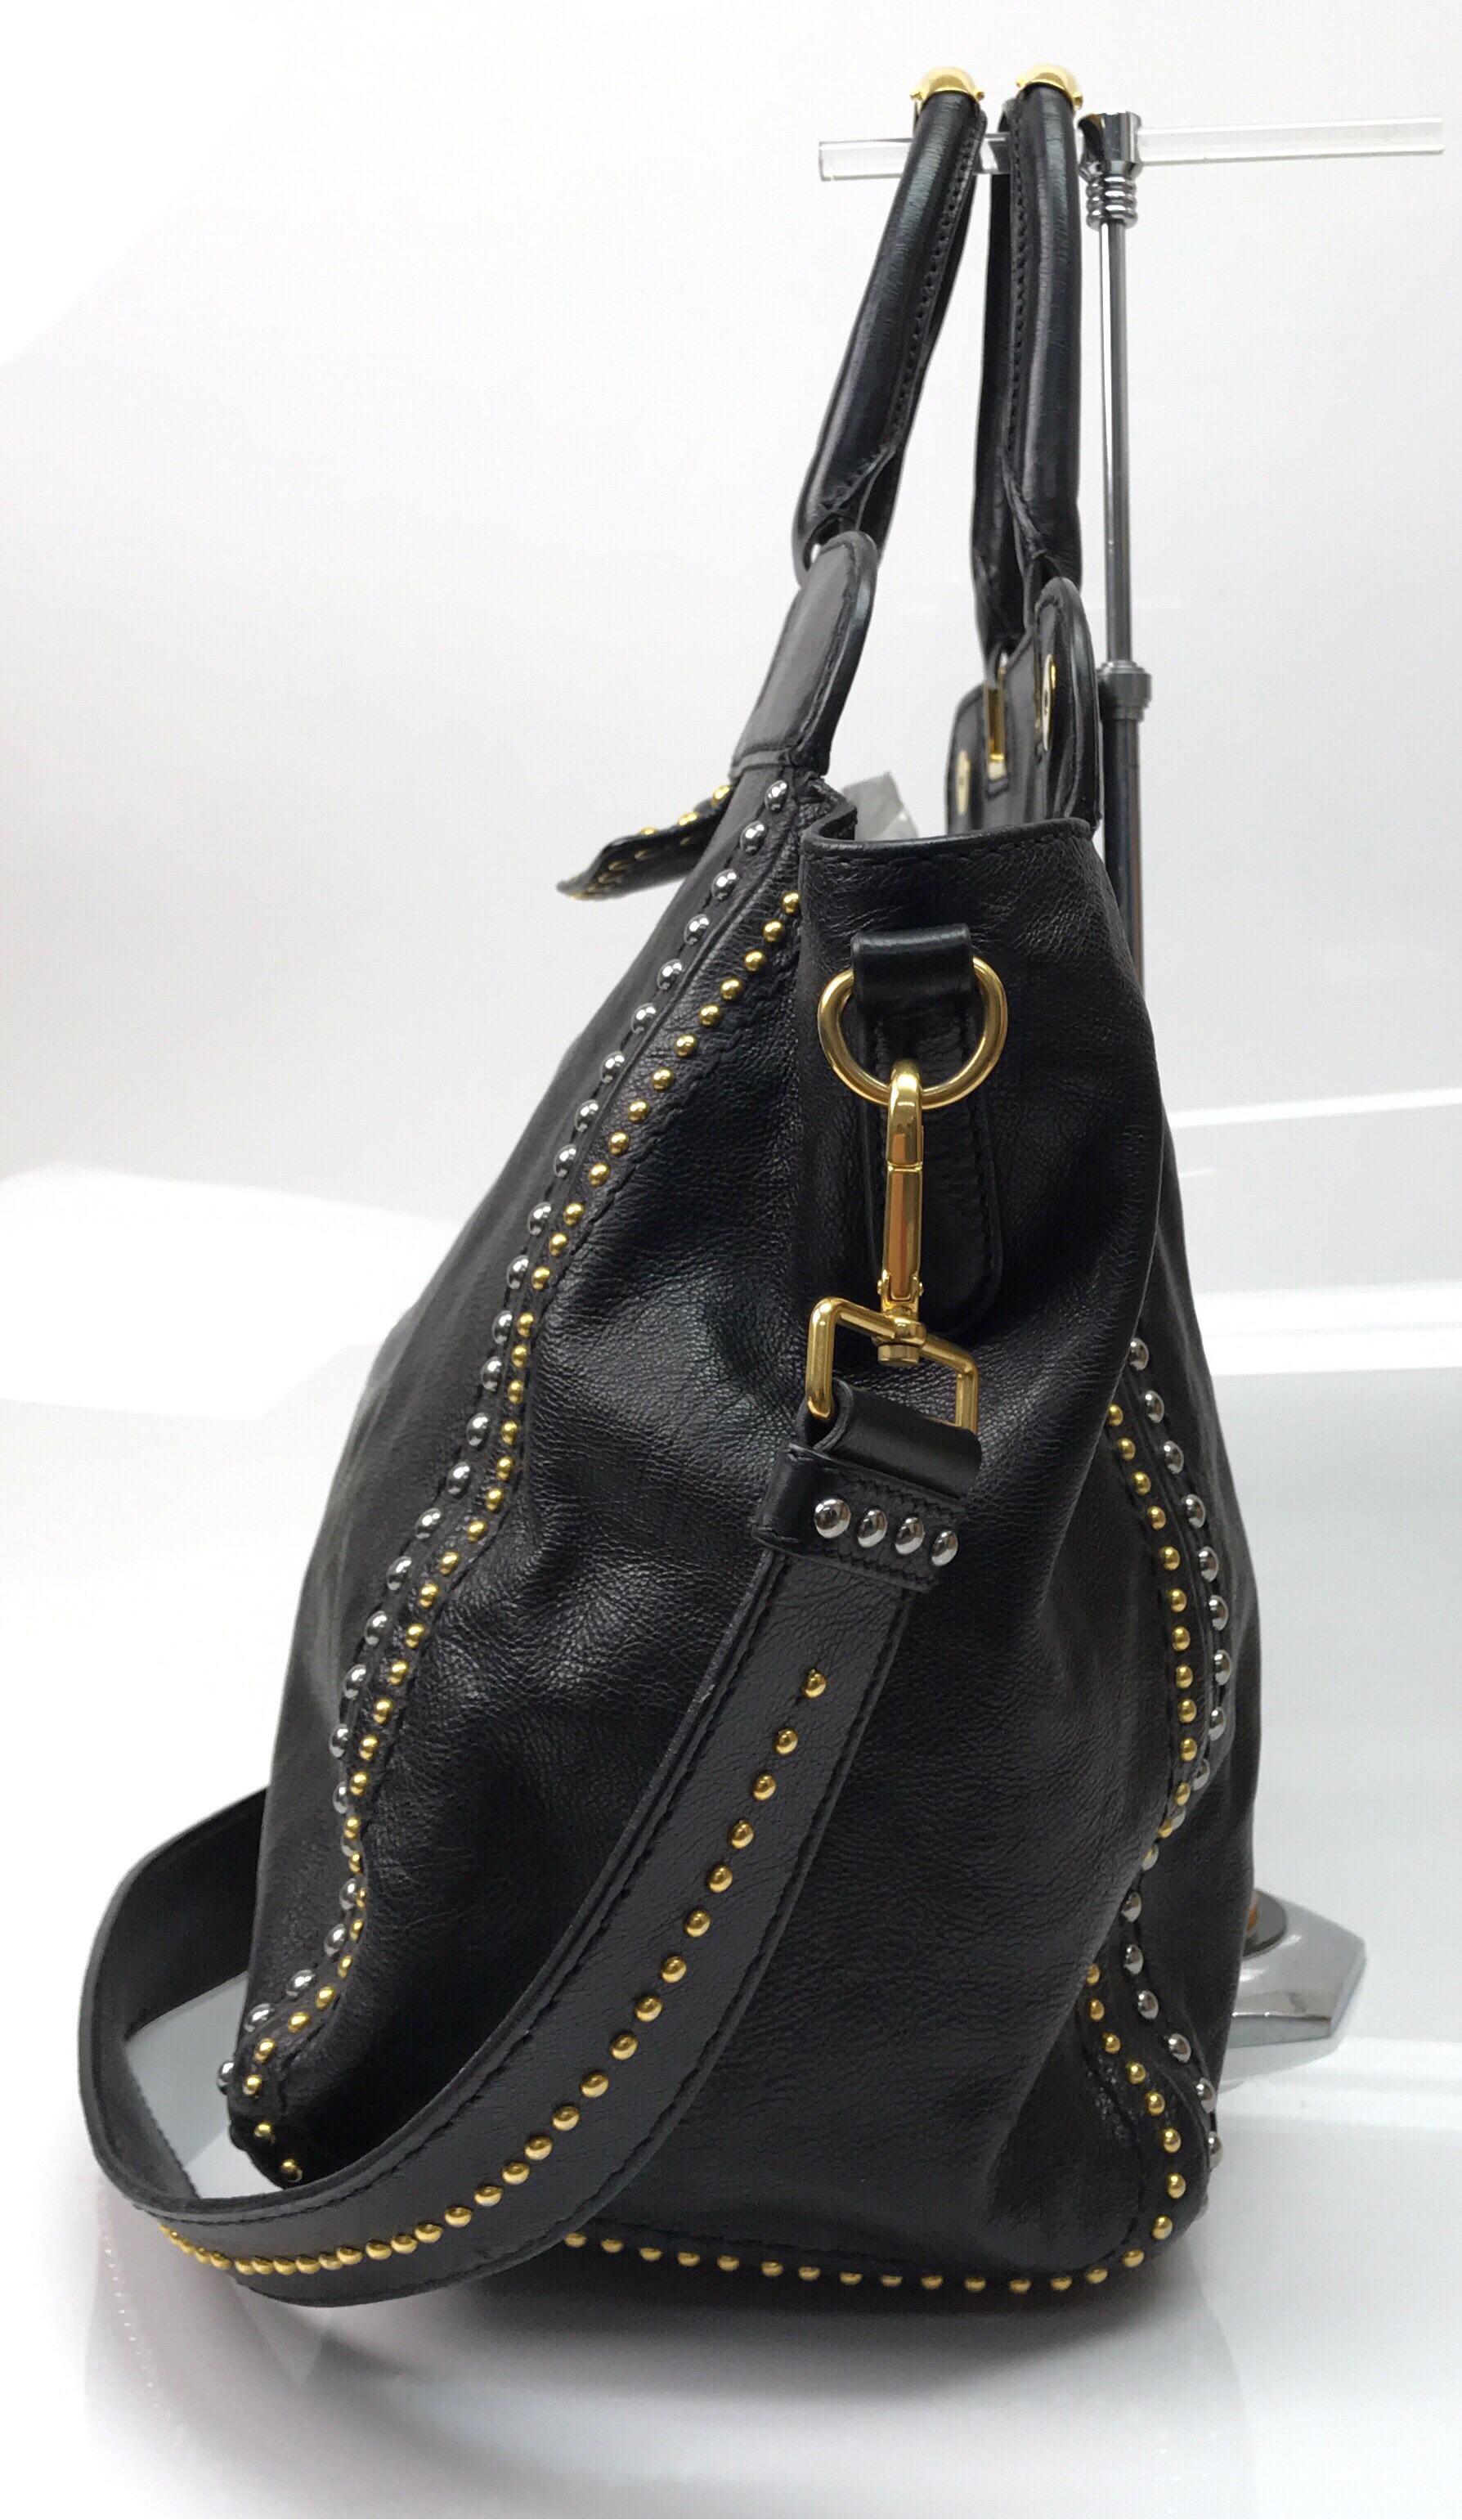 PRADA Runway Black w/ Gold&Silver Studded Large Tote. This amazing Prada tote is in great condition. It has minimal sign of use that is consistent with age. It is made of black leather with gold and silver studs throughout. There is a black leather